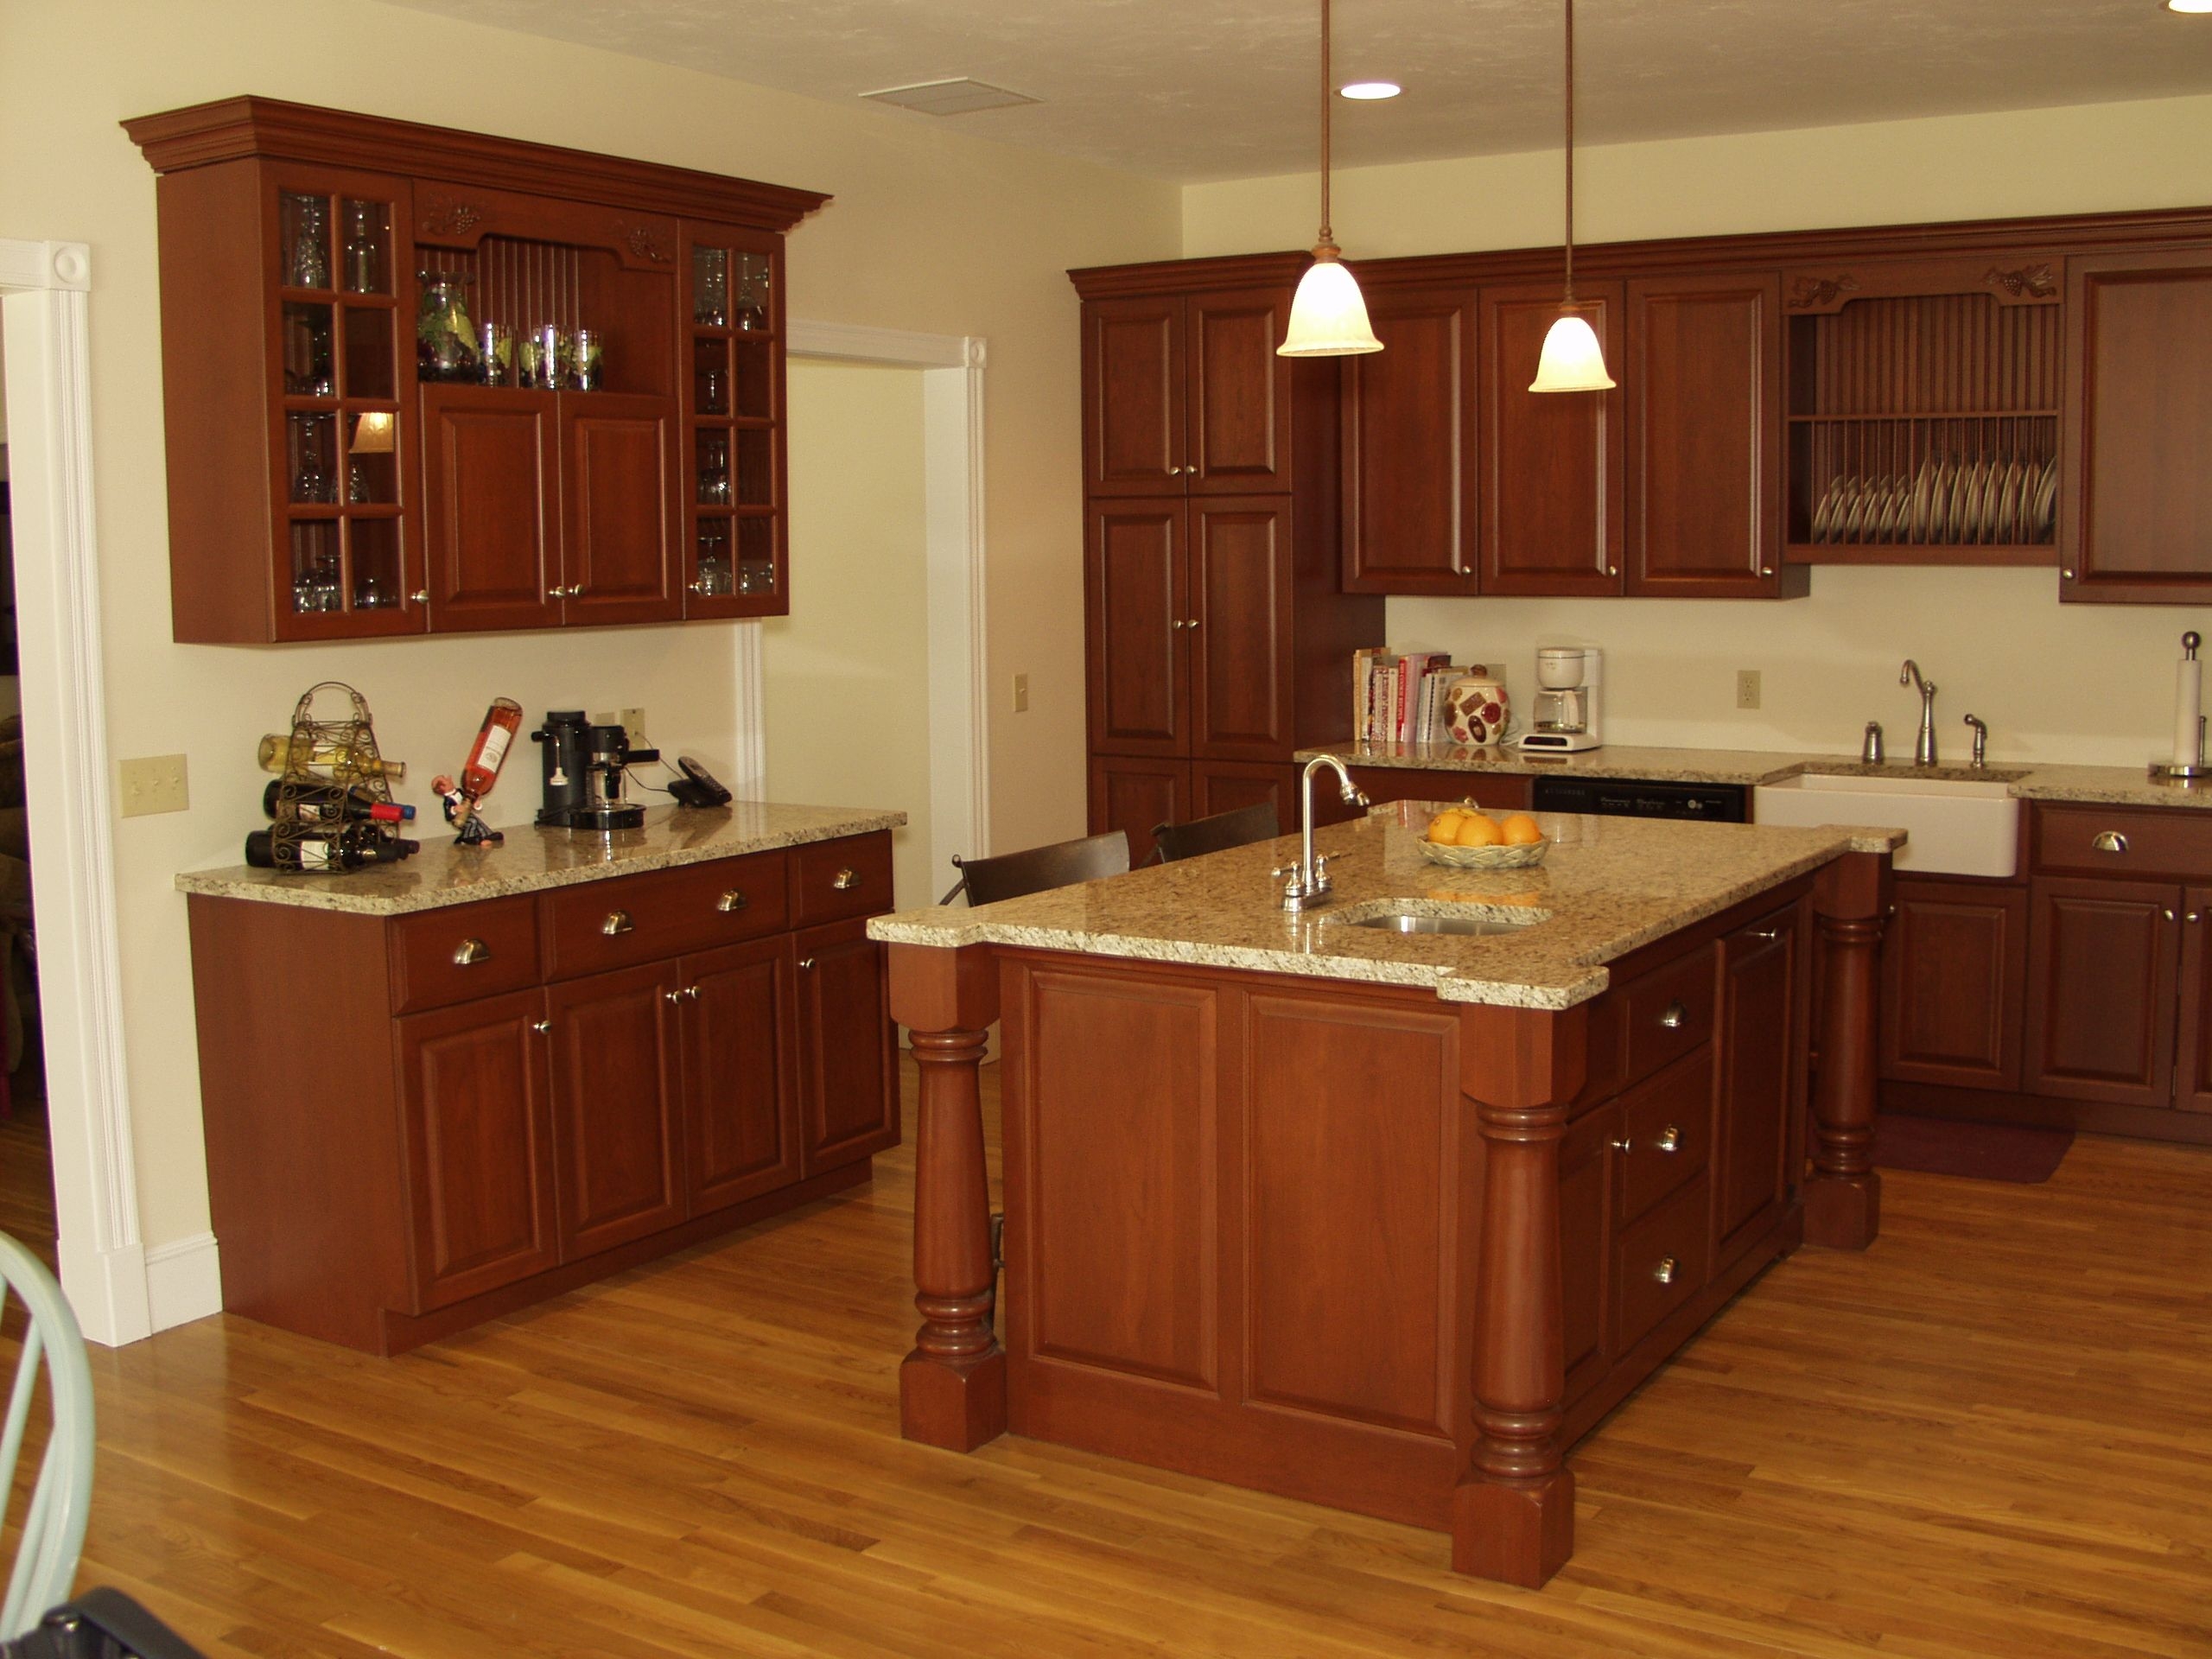 With sweet cherry cabinets as furniture kitchen decor in modern